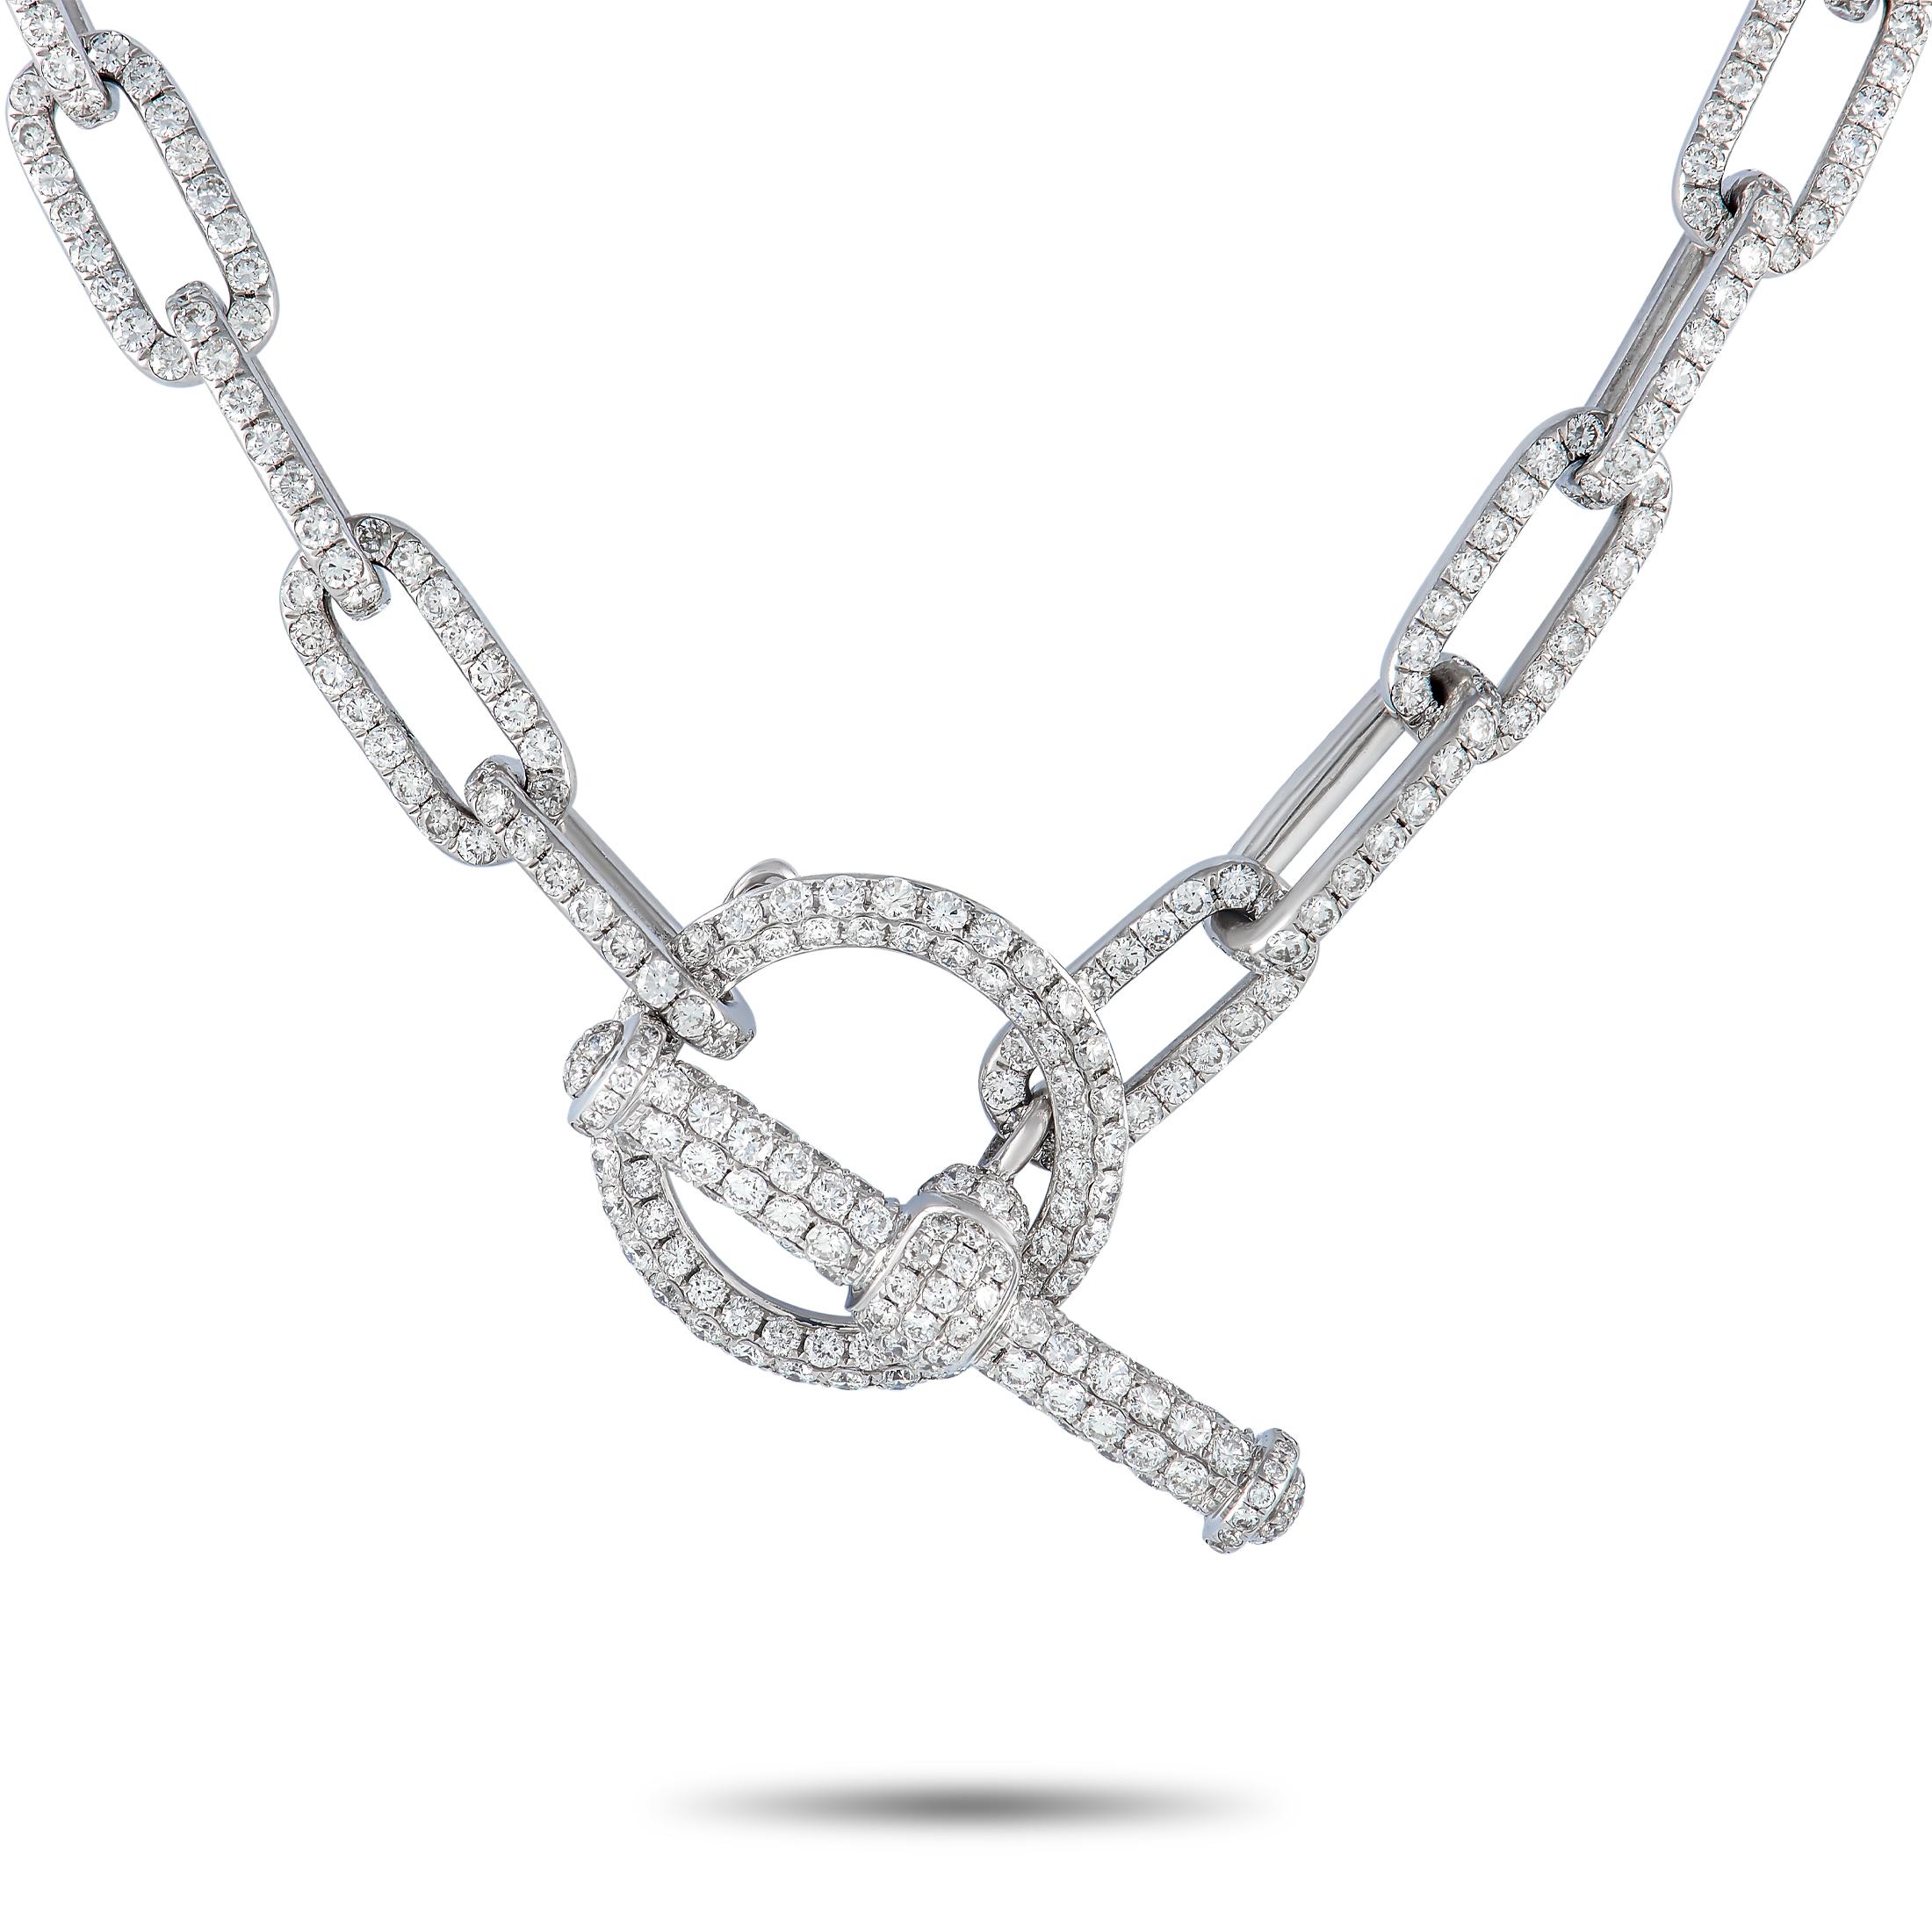 Add instant glamor to any outfit with this diamond link necklace in white gold. The 20.5-inch long necklace features a chain of rounded rectangular links encrusted in diamonds and in a smooth, polished finish. A diamond-embellished round link acts